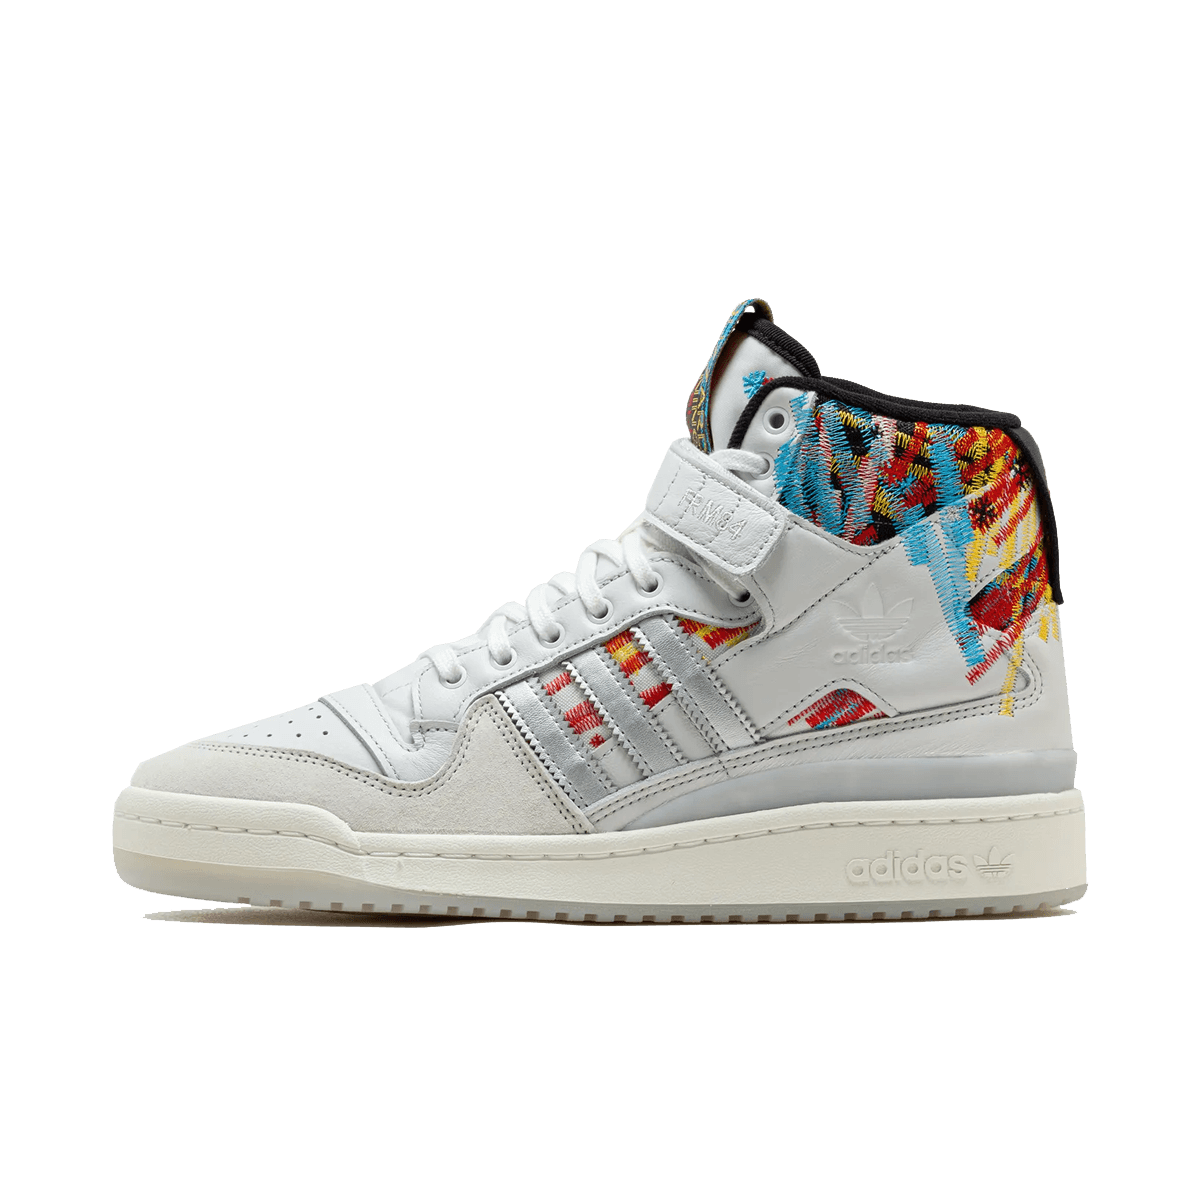 Jacques Chassaing x adidas Forum 84 High NBA Jaccard IG6351